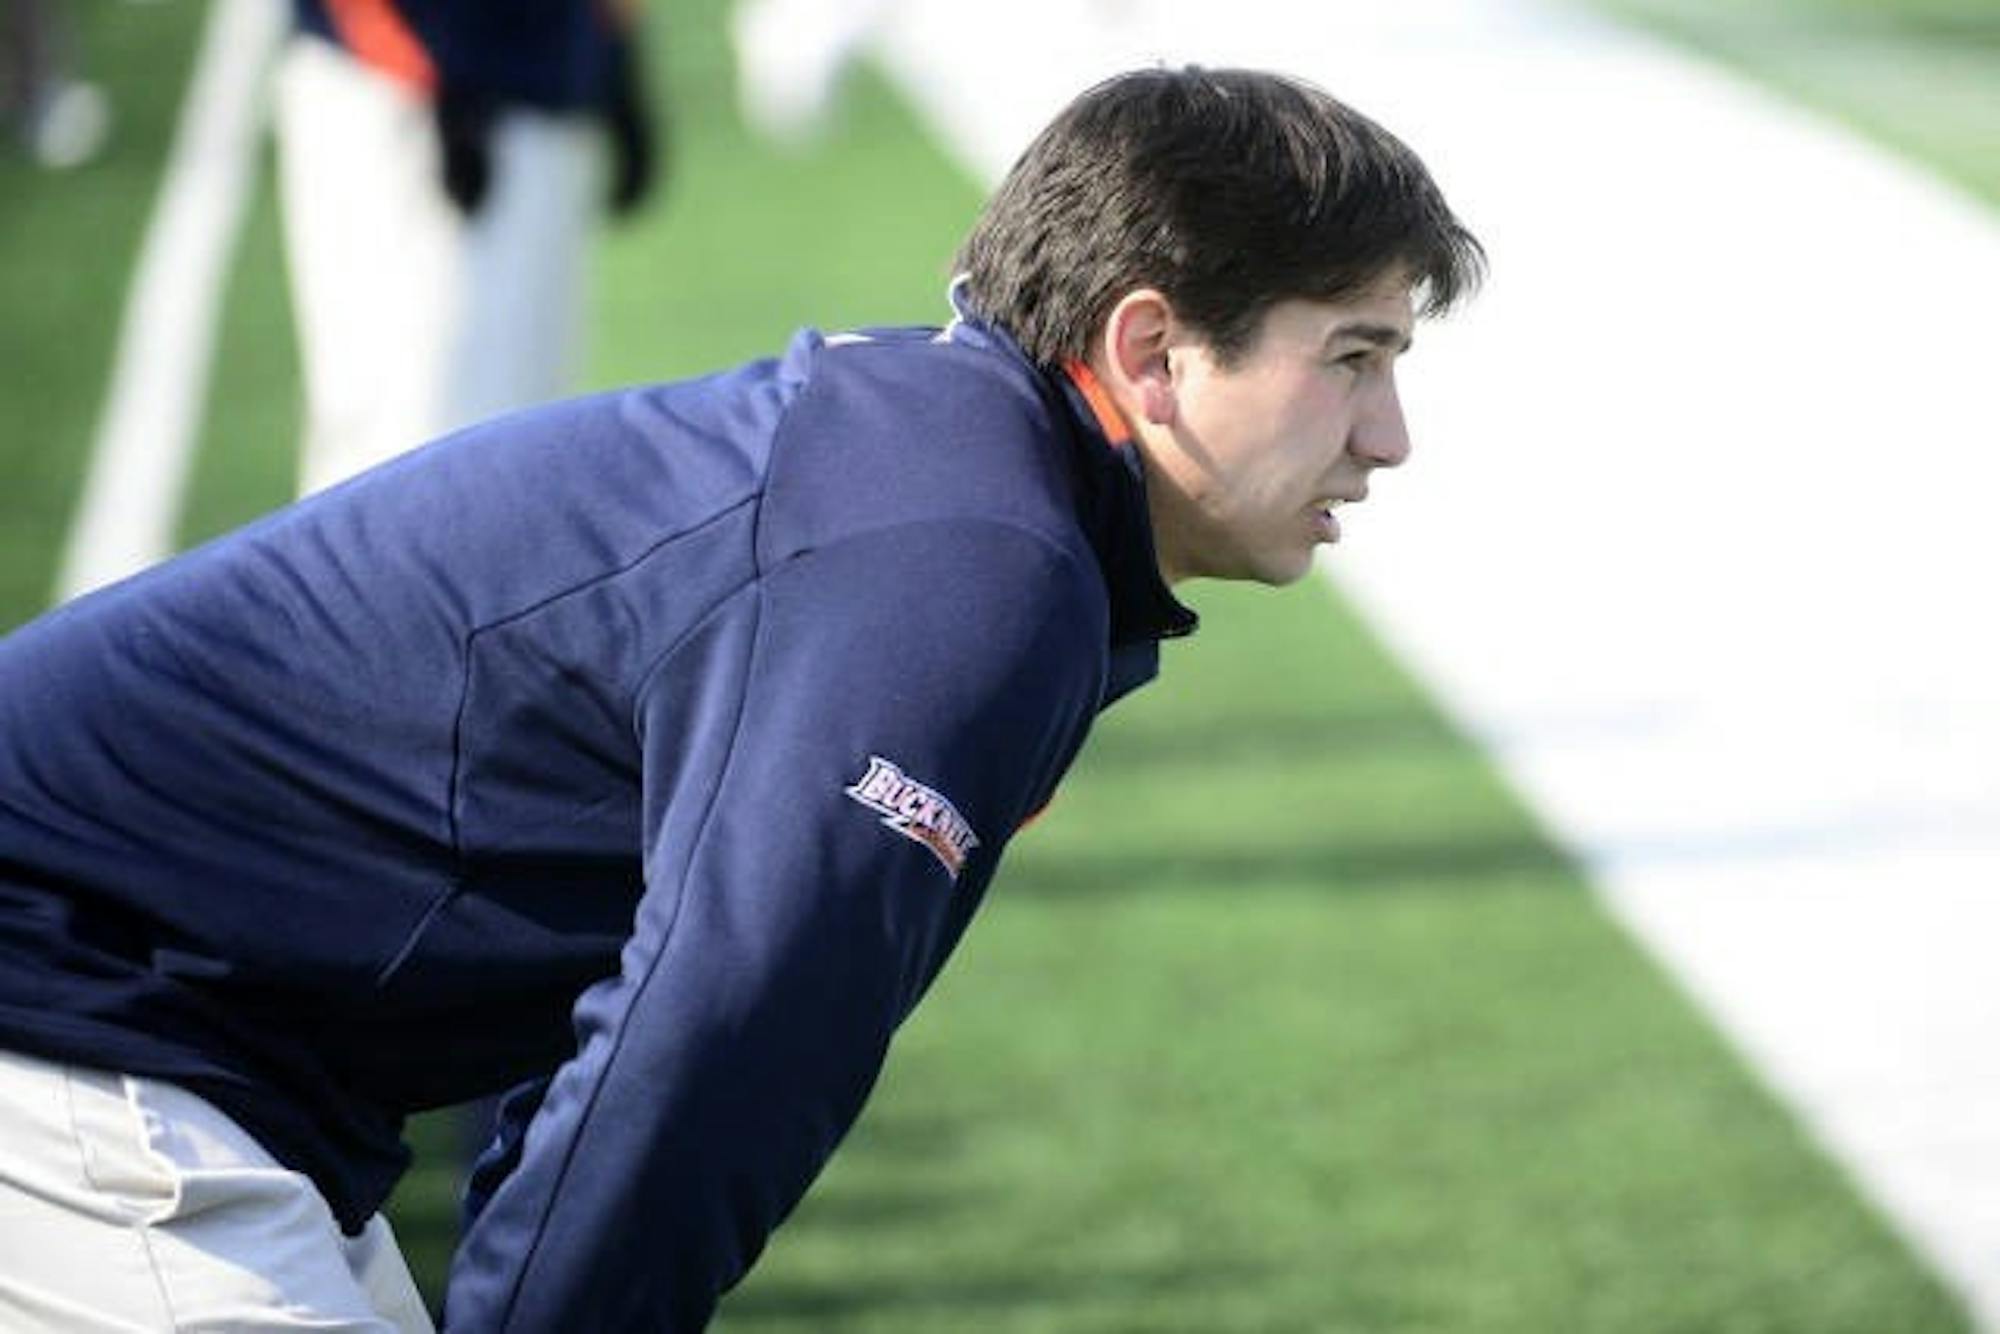 The Big Green hired Joe Conner Jr. from Bucknell University to serve as associate head coach and offensive coordinator.